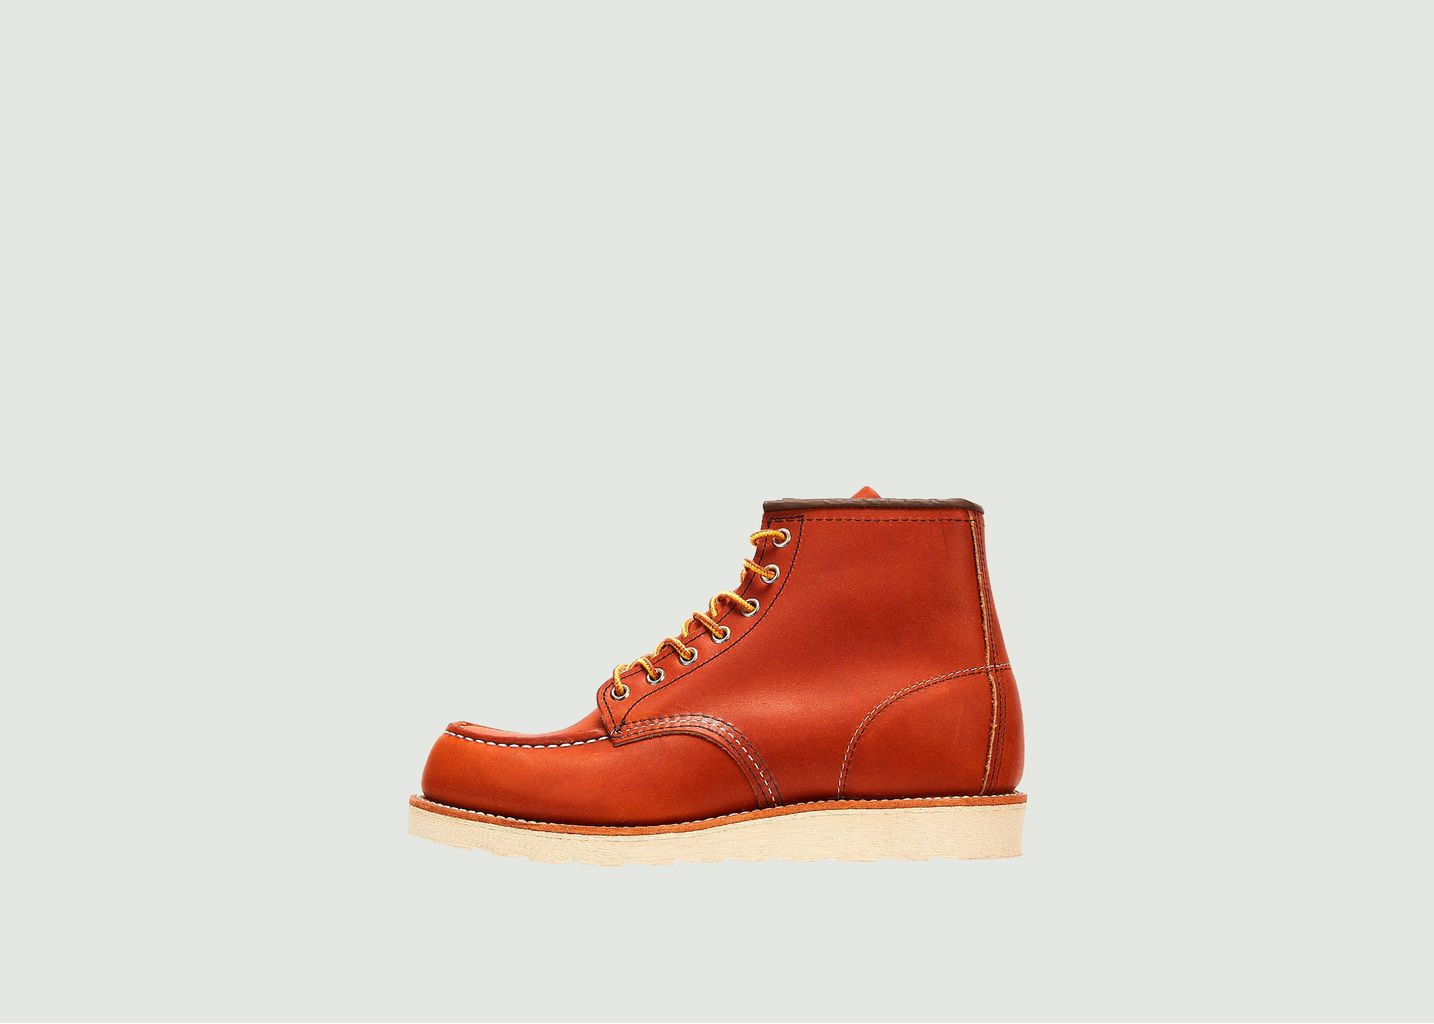 8875 Classic Moc lace-up leather boots - Red Wing Shoes